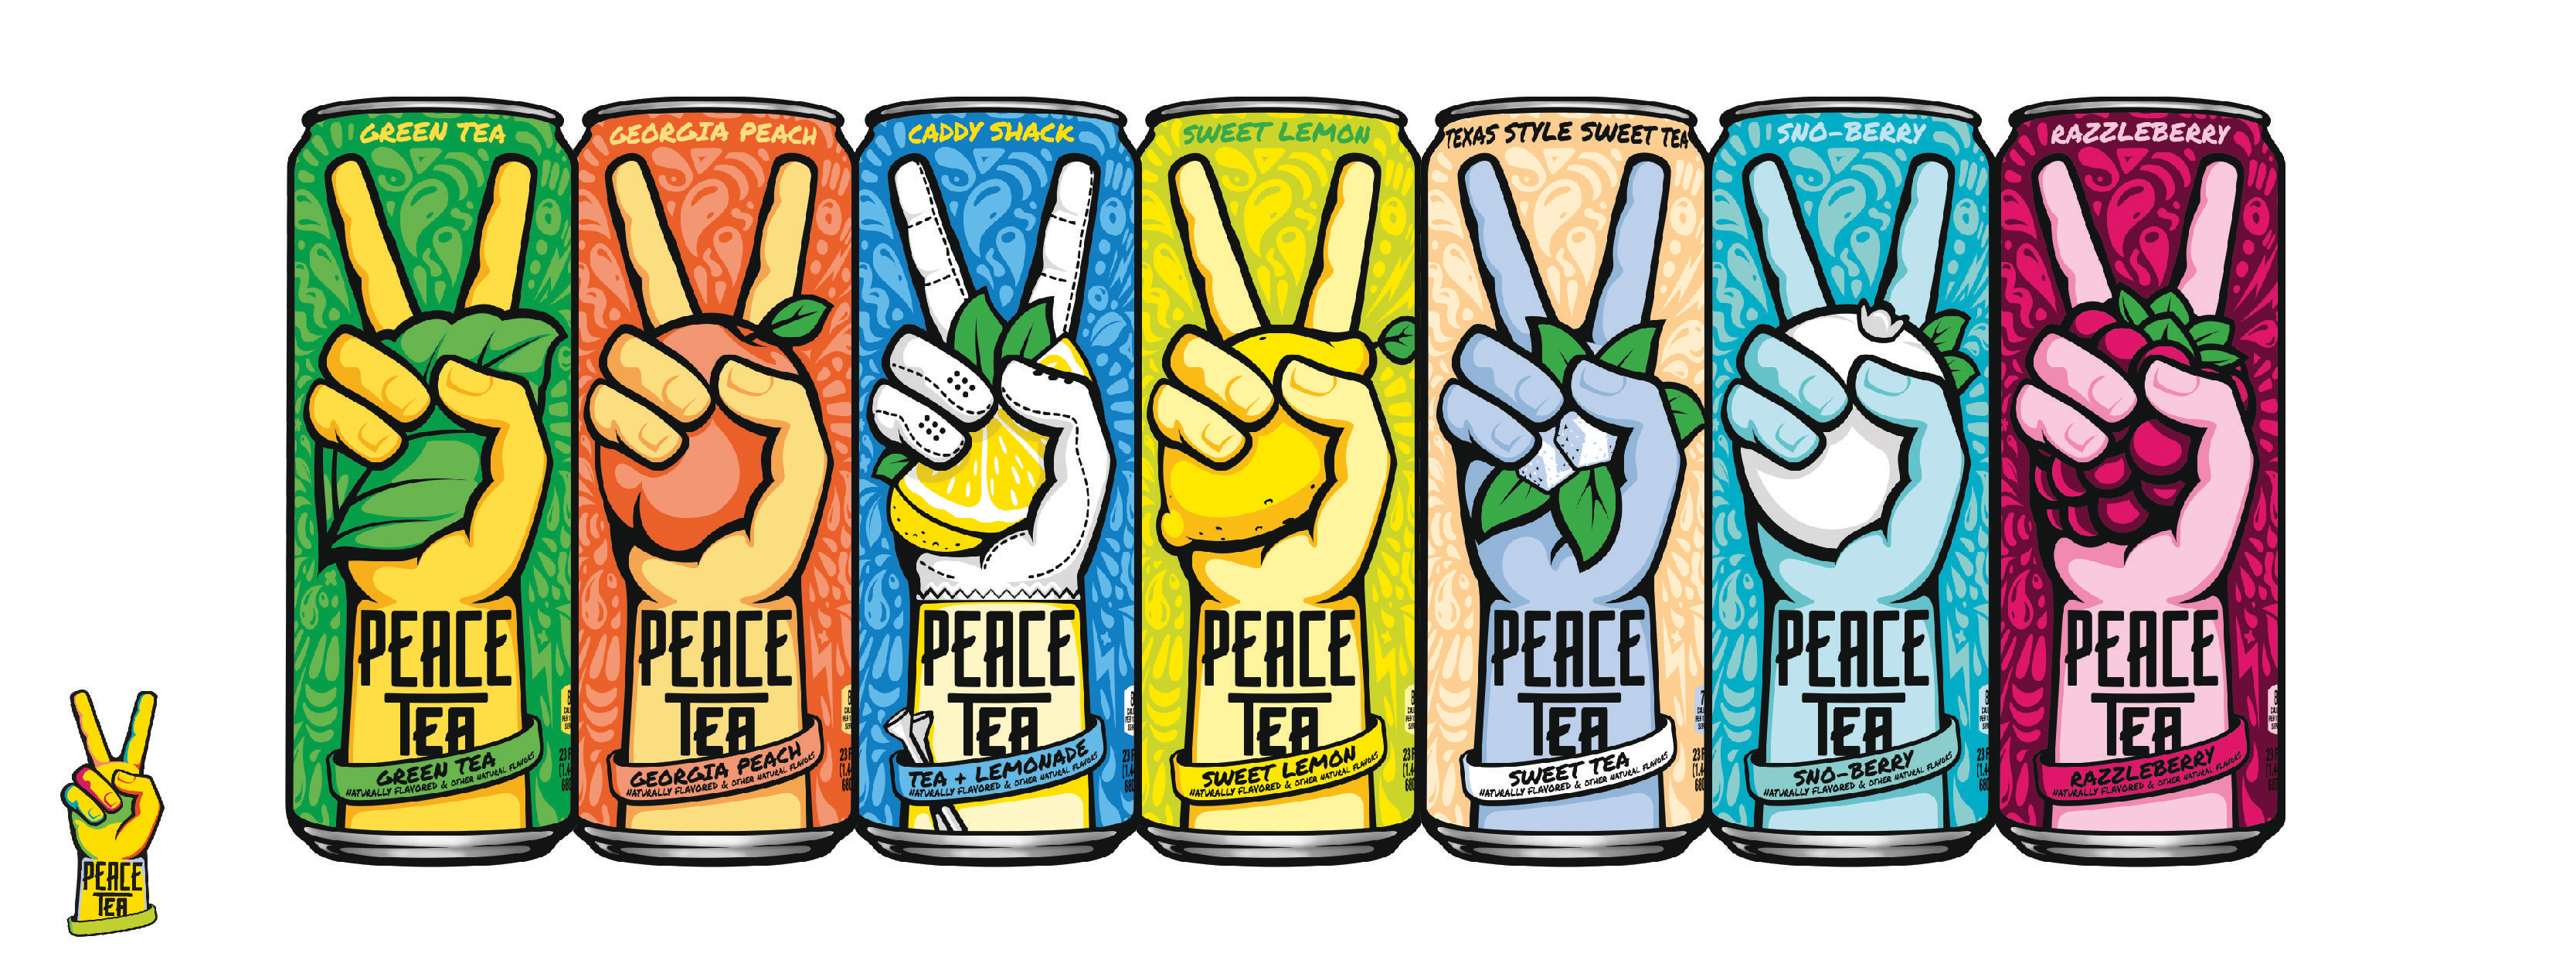 Peace Tea® Puts A Refreshing Spin On Summer With Debut Of “Choose Peace” Campaign | Business Wire